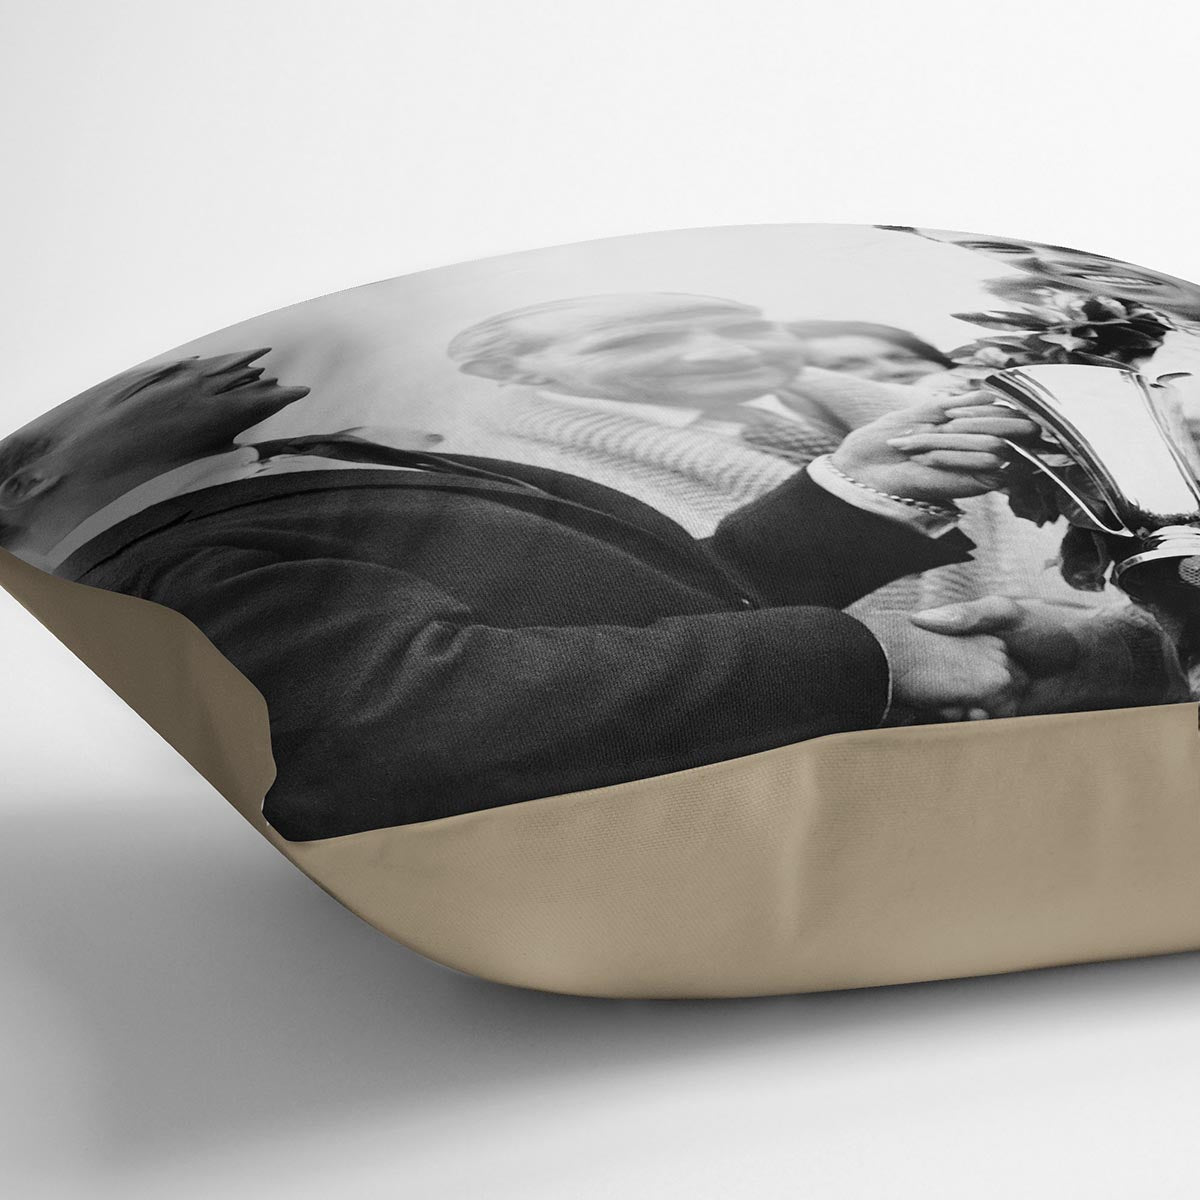 British racing drivers Jim Clark and Stirling Moss Cushion